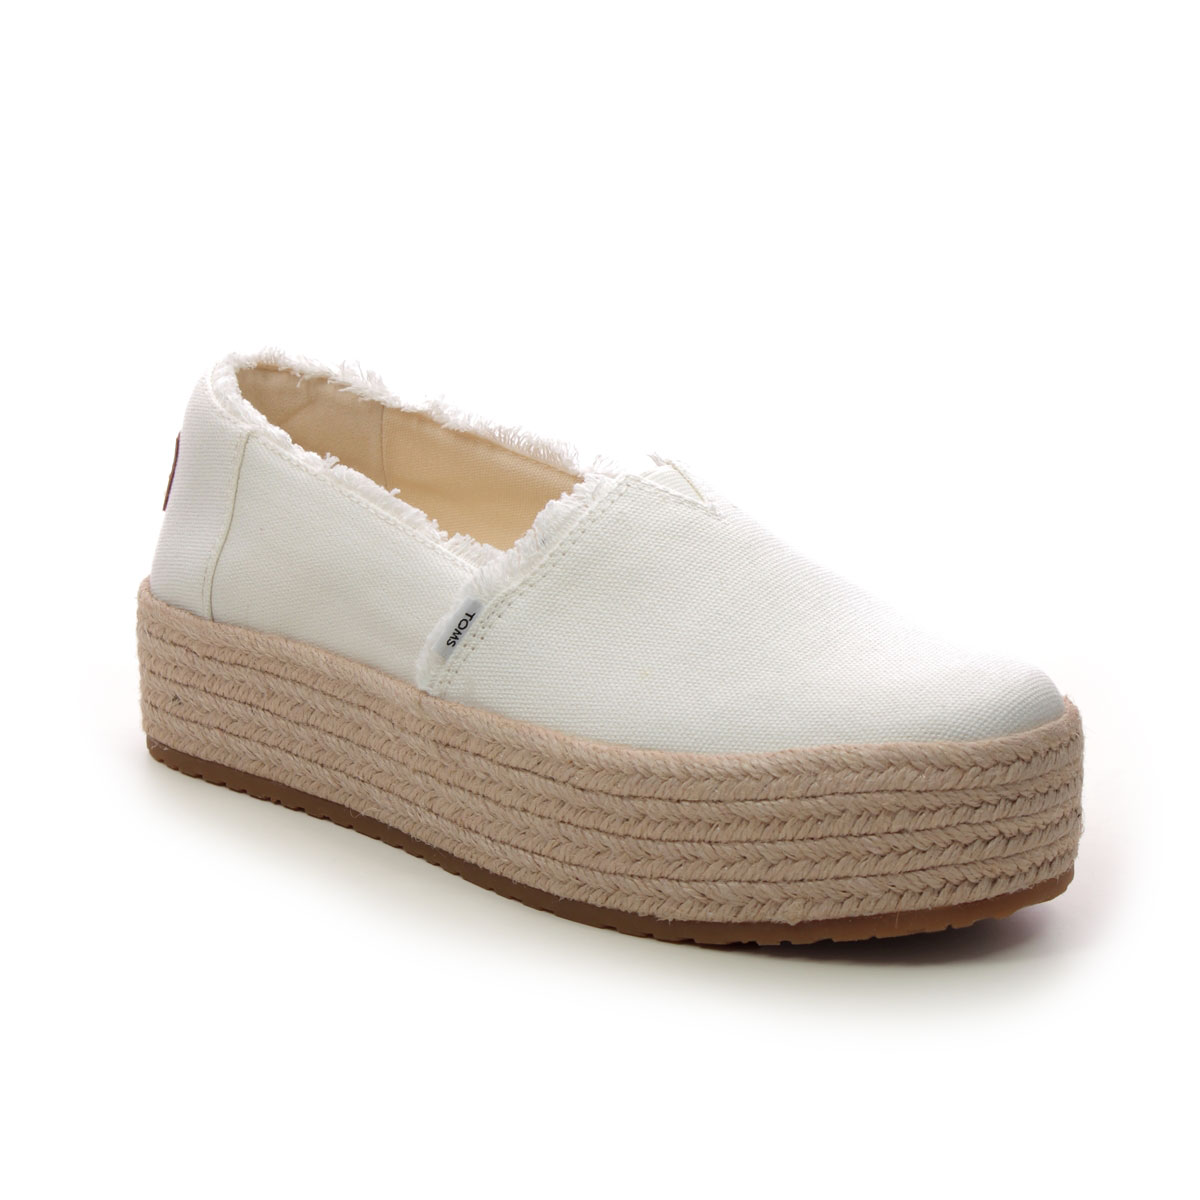 Toms Valencia Platform White Womens Espadrilles 10019820-66 in a Plain Canvas in Size 6